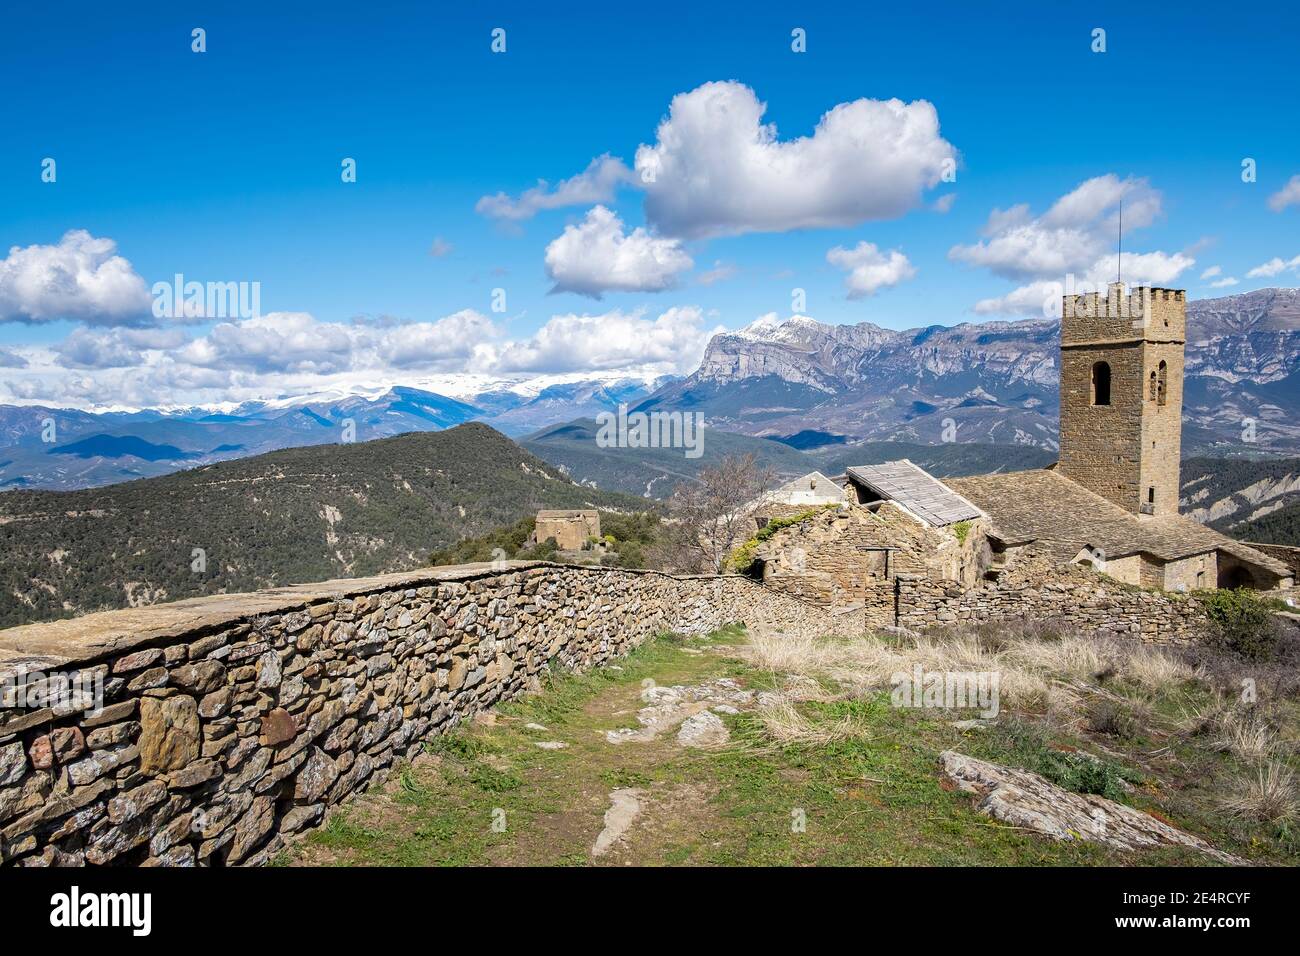 medieval walled village in ruins with a crenelated tower and snow-capped mountains in the background, walled enclosure of Muro de la Roda, La Fueva, S Stock Photo